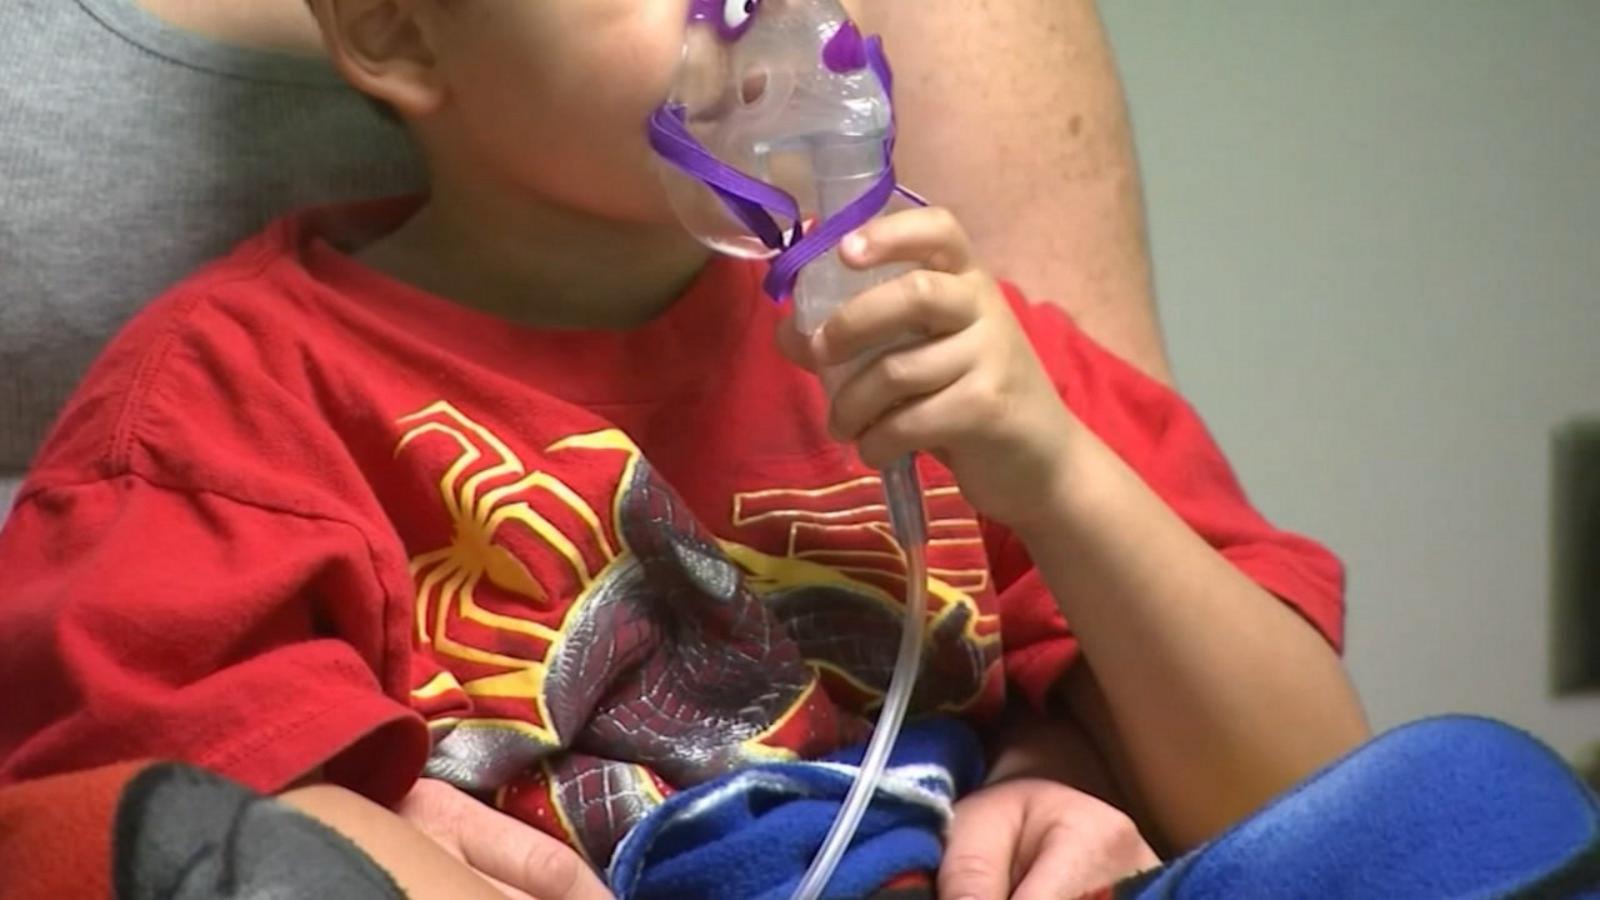 VIDEO: Doctors warn of a spike in respiratory infections